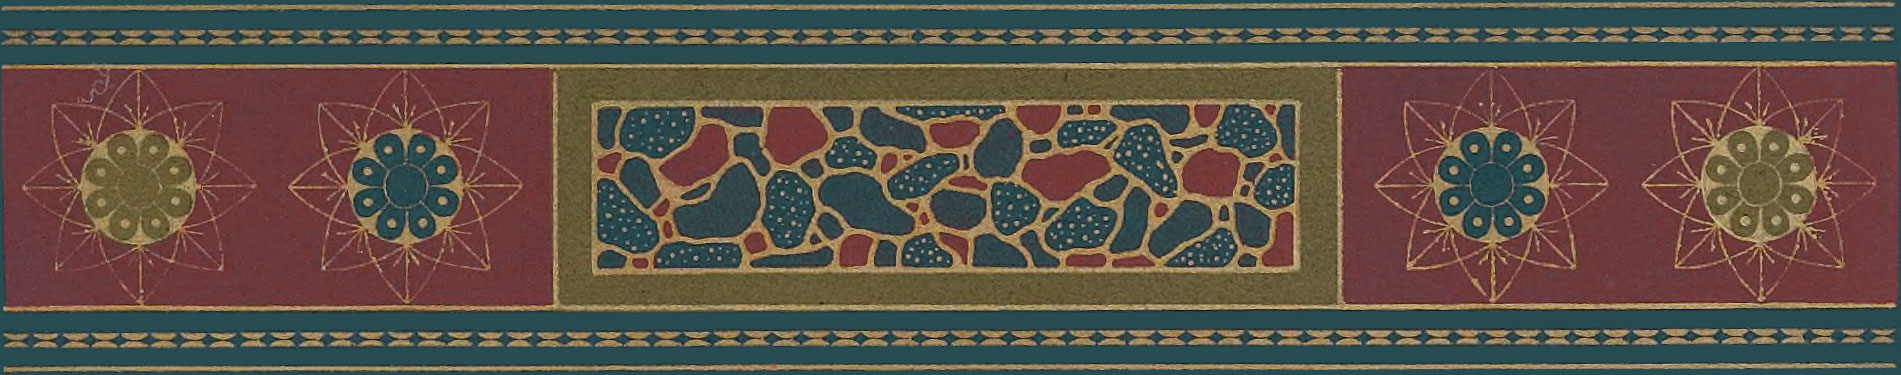 Ornate border comprising red, orange, and gold colors